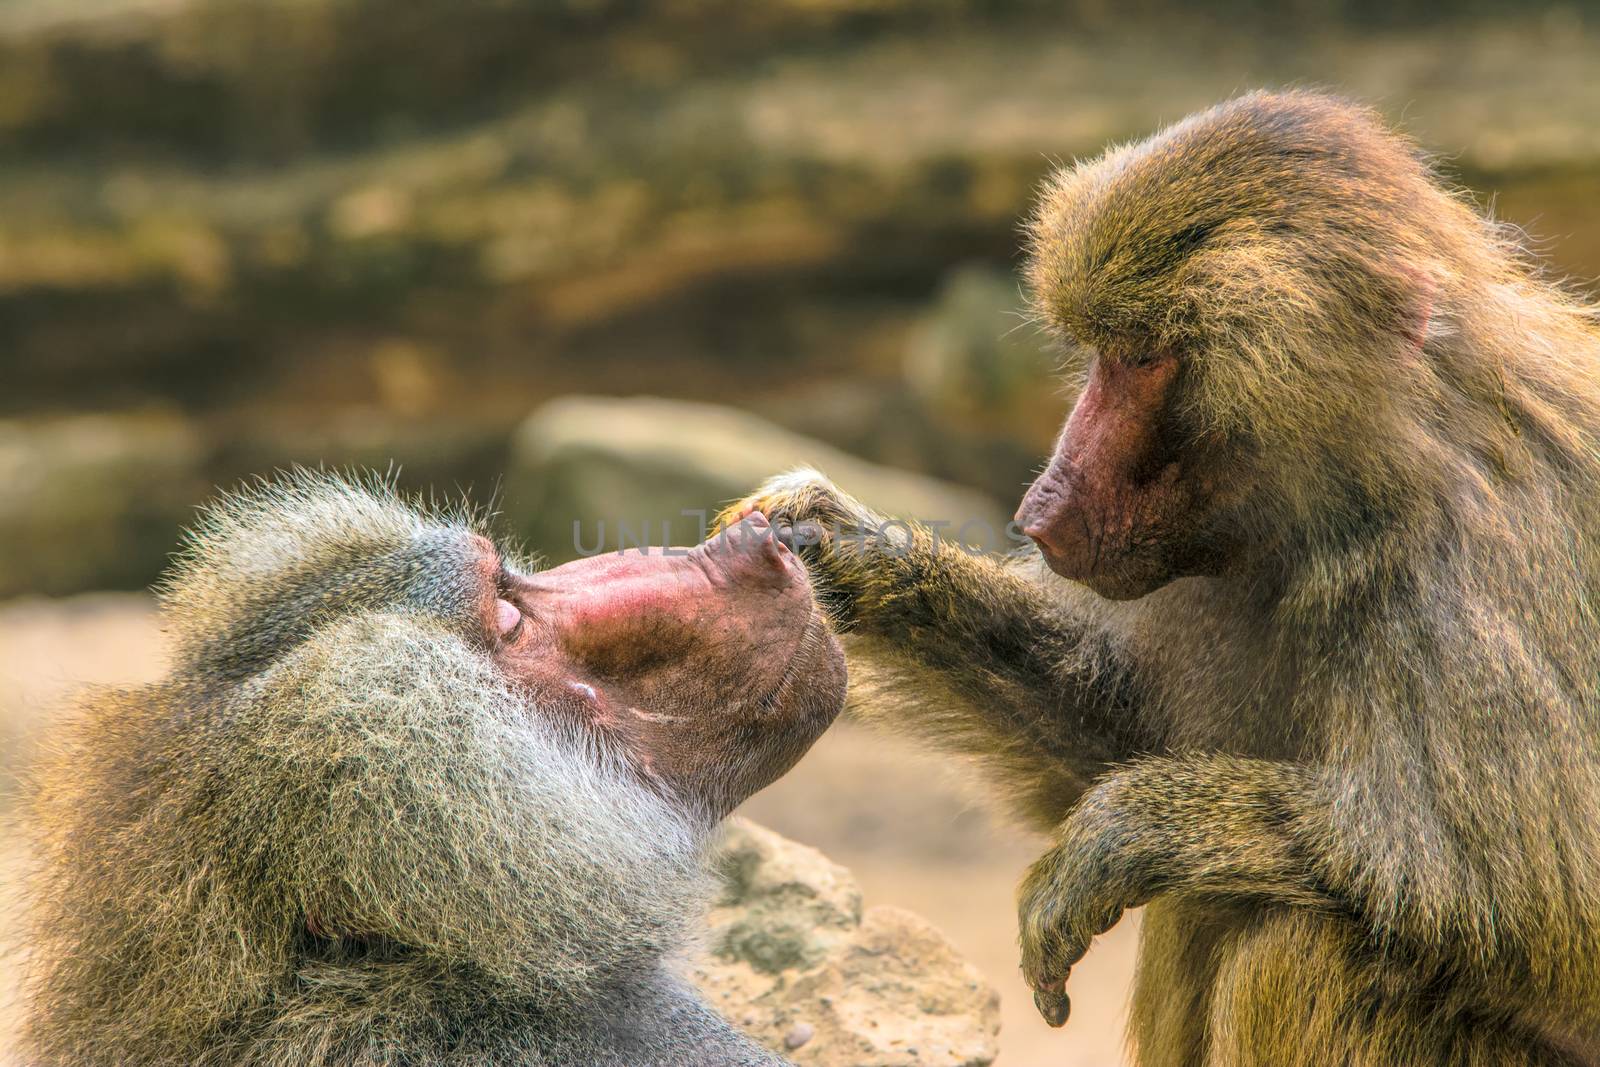 Hamadryas Baboon also known as Papio hamadryas taking care of each other.